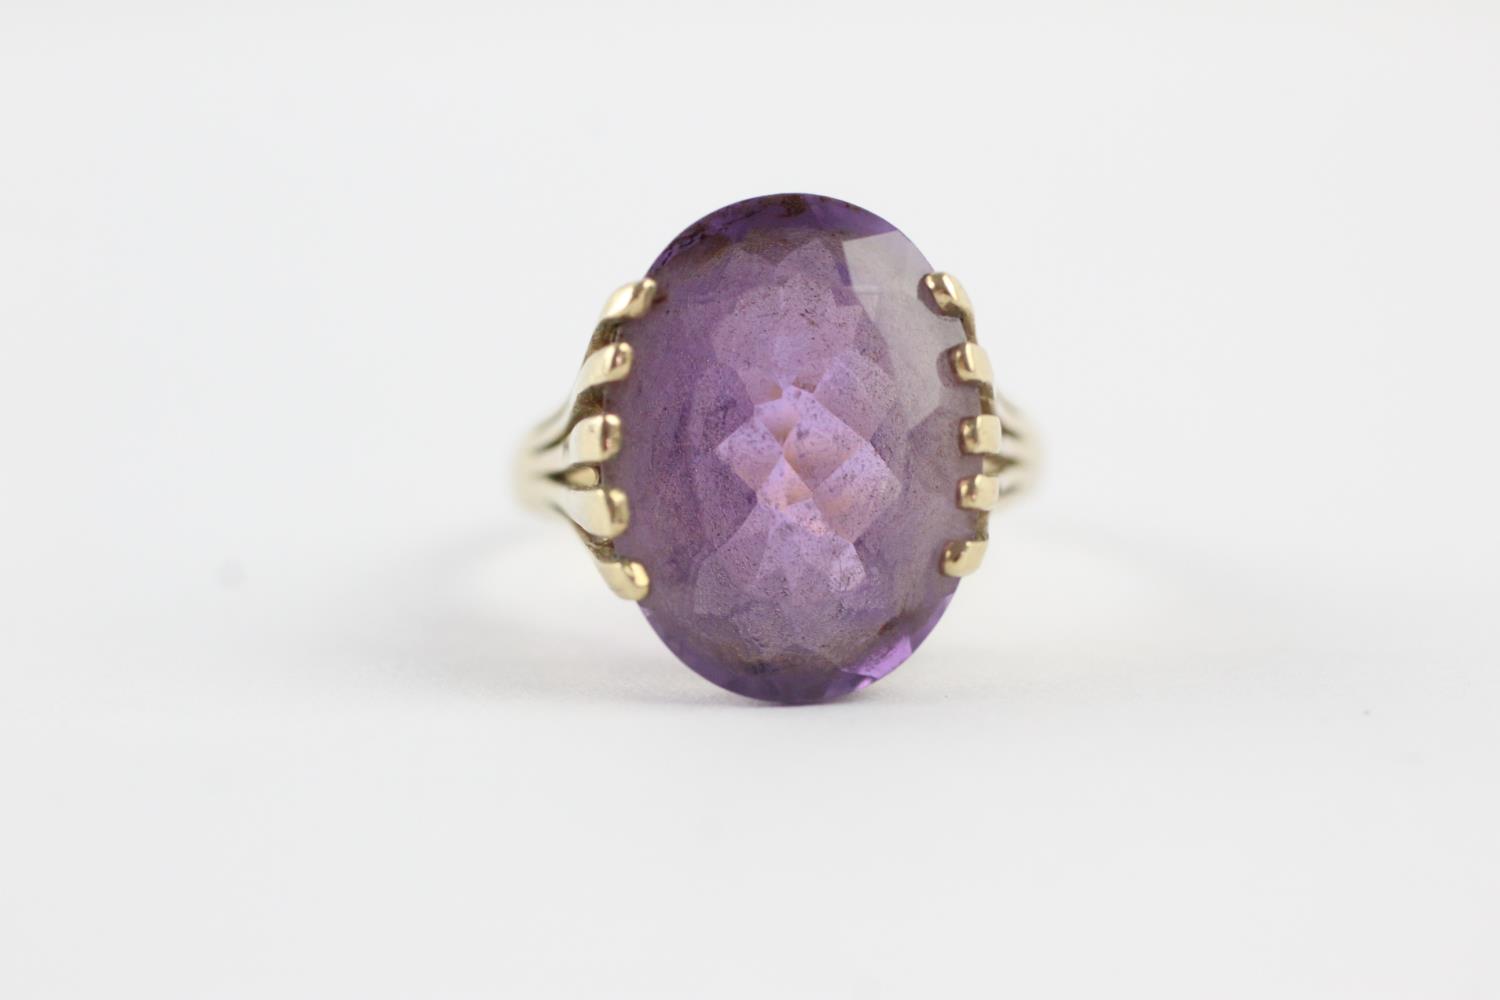 9ct gold amethyst high profile setting cocktail ring (3.8g) size O - Image 2 of 9